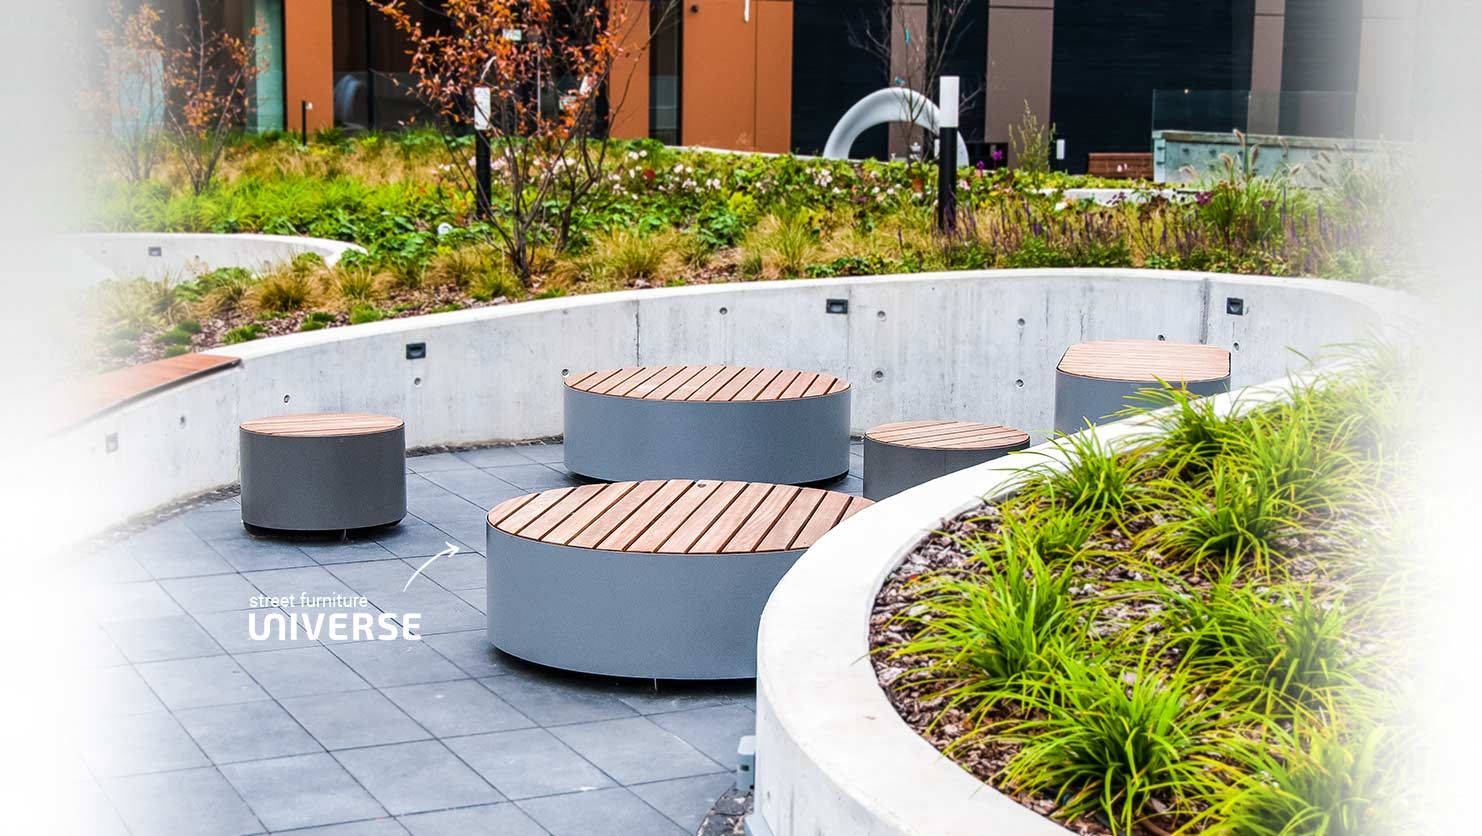 ZANO Street furniture | Universe benches and solar station